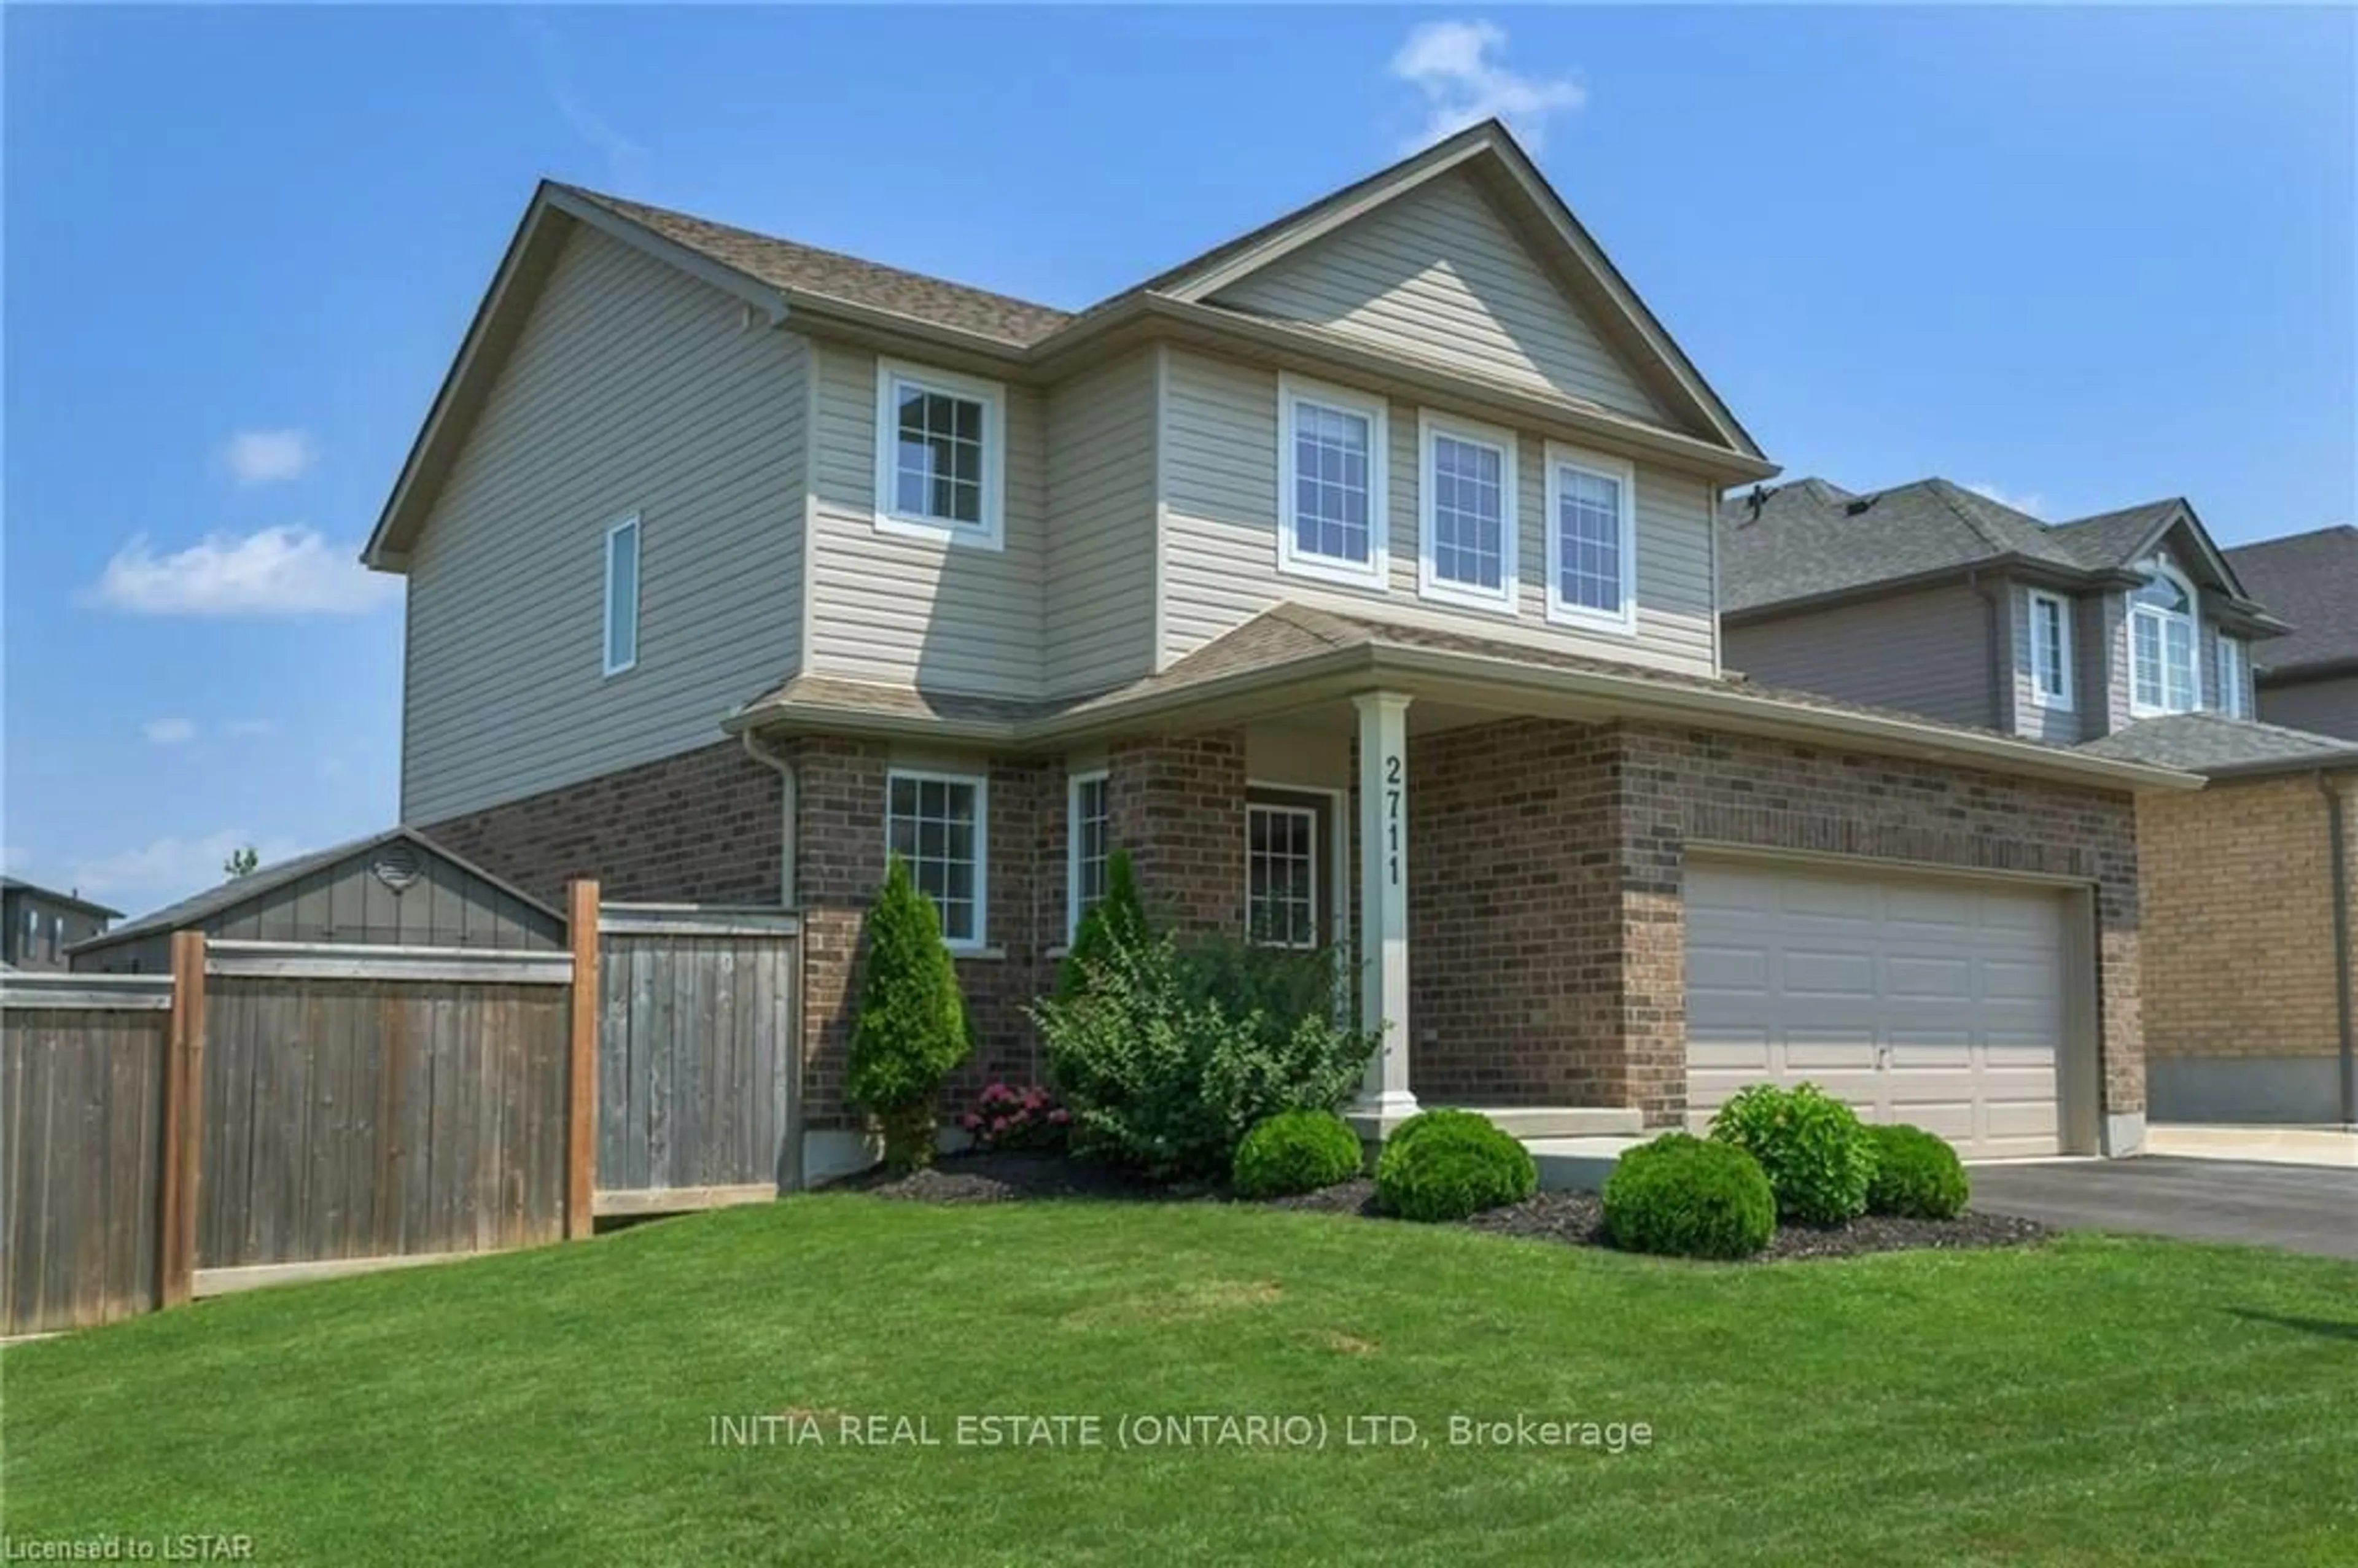 Frontside or backside of a home for 2711 Foxbend Link, London Ontario N6G 5B4